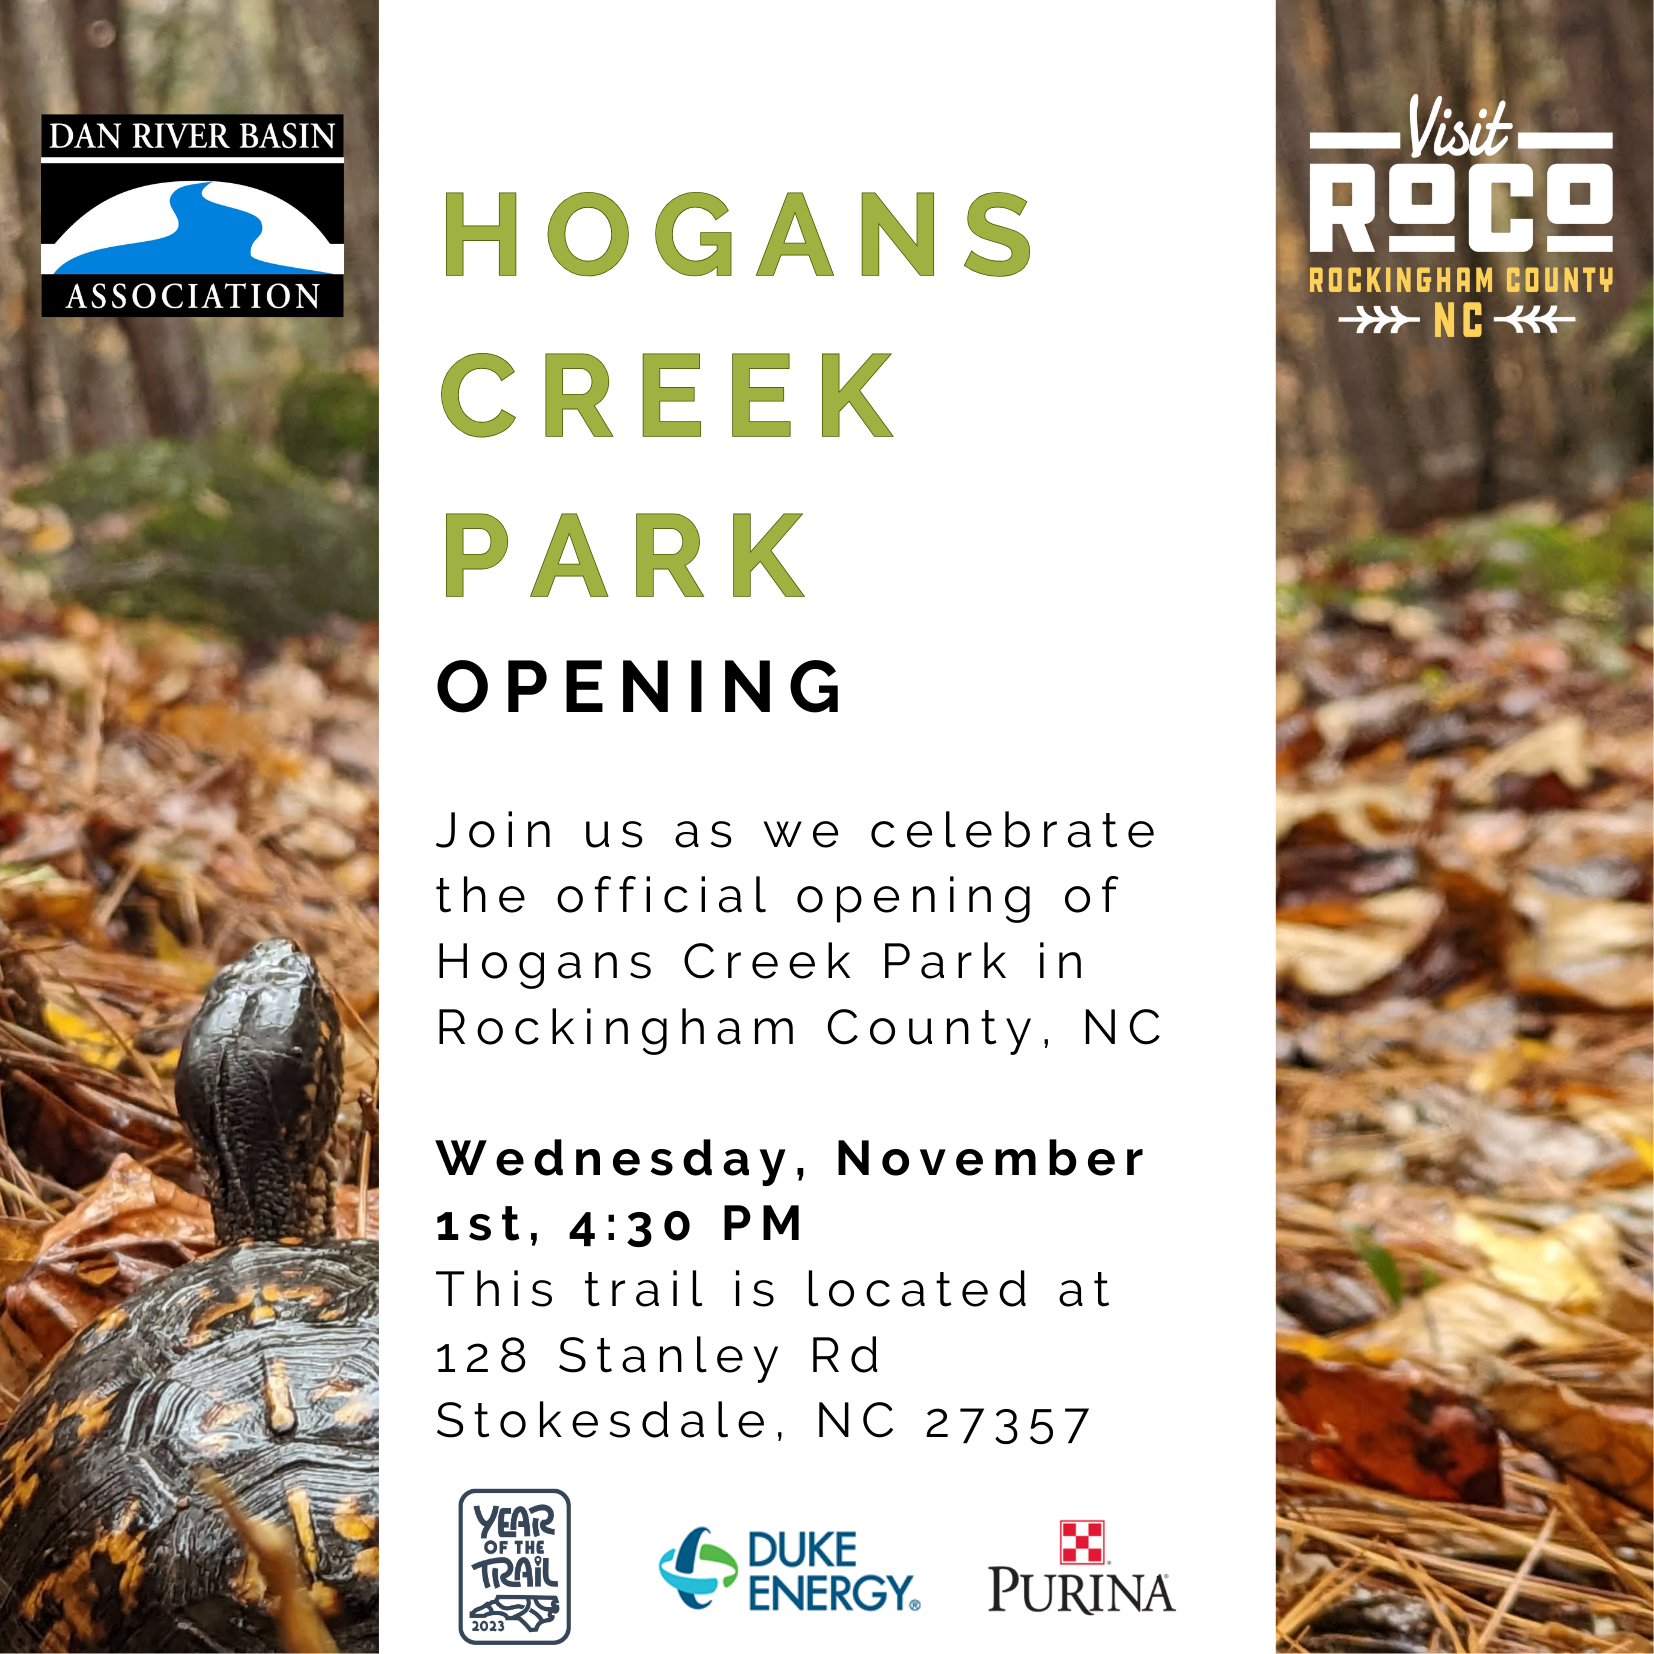 Invitation with details of the hogans creek trail!